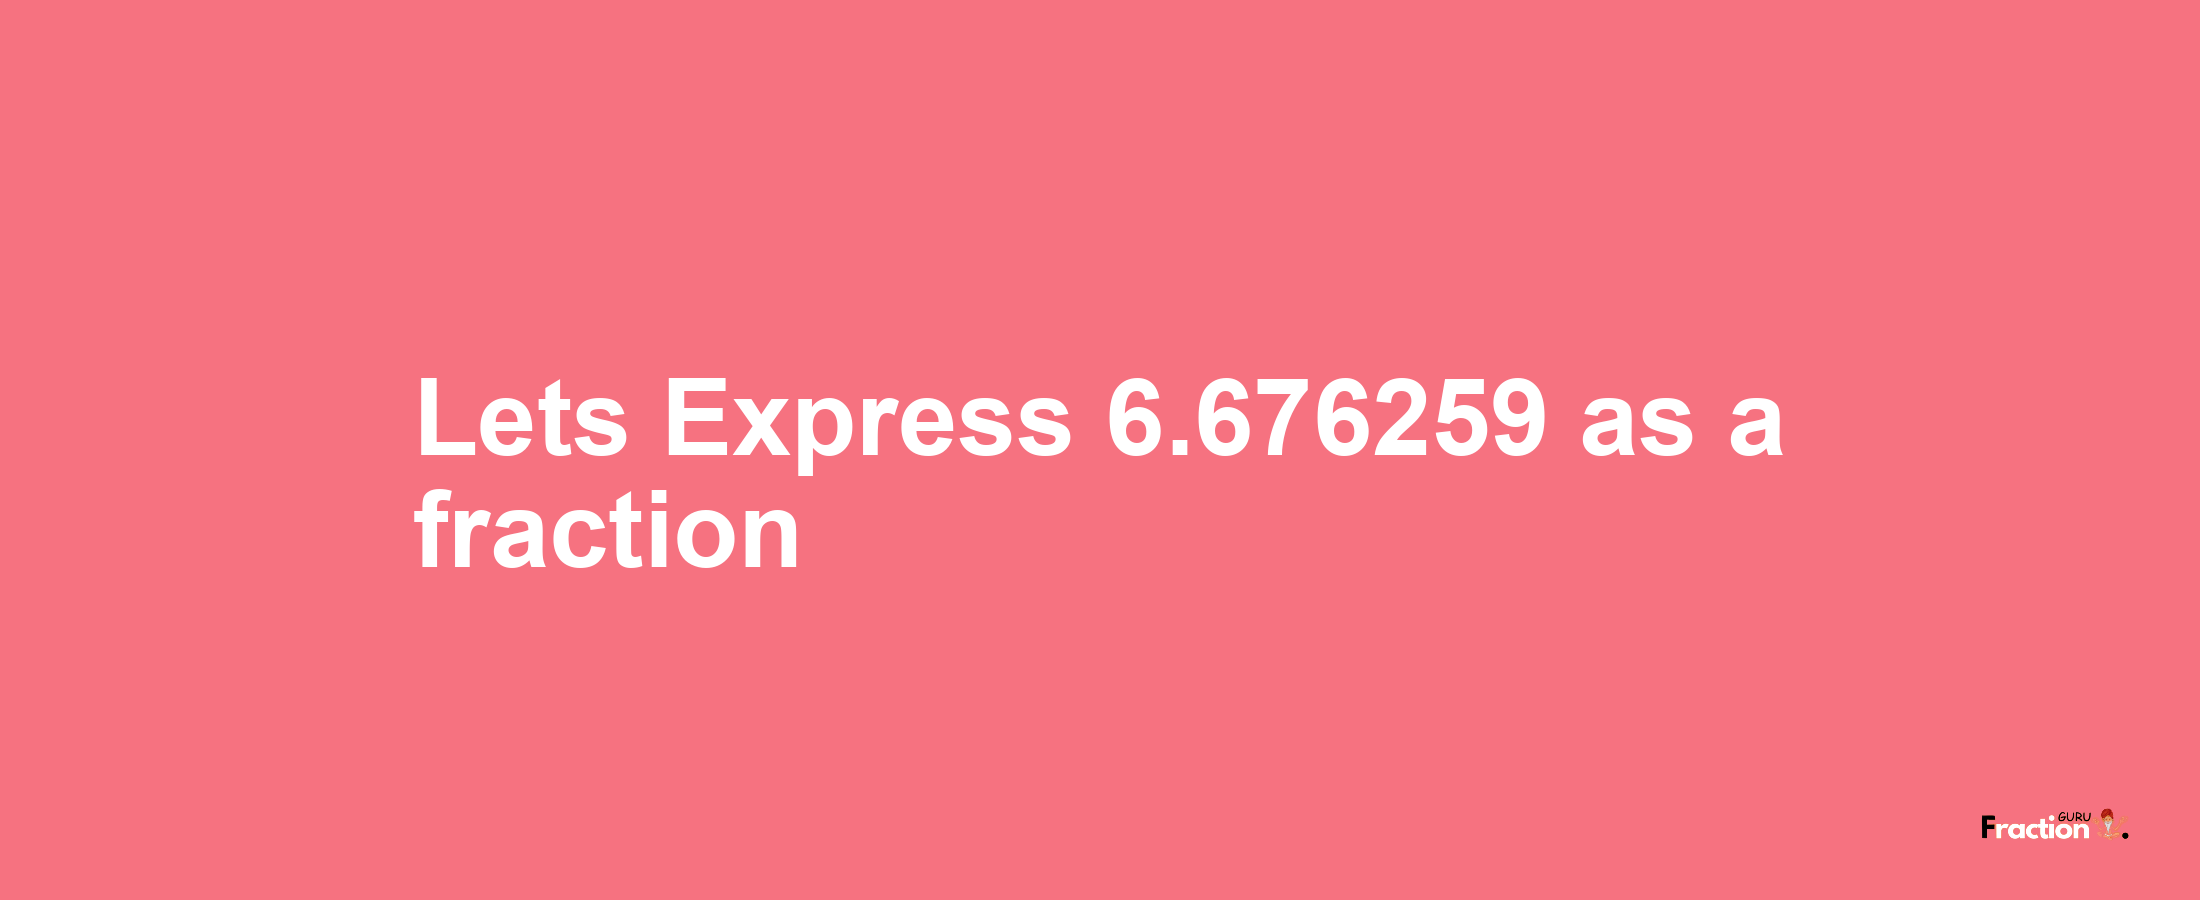 Lets Express 6.676259 as afraction